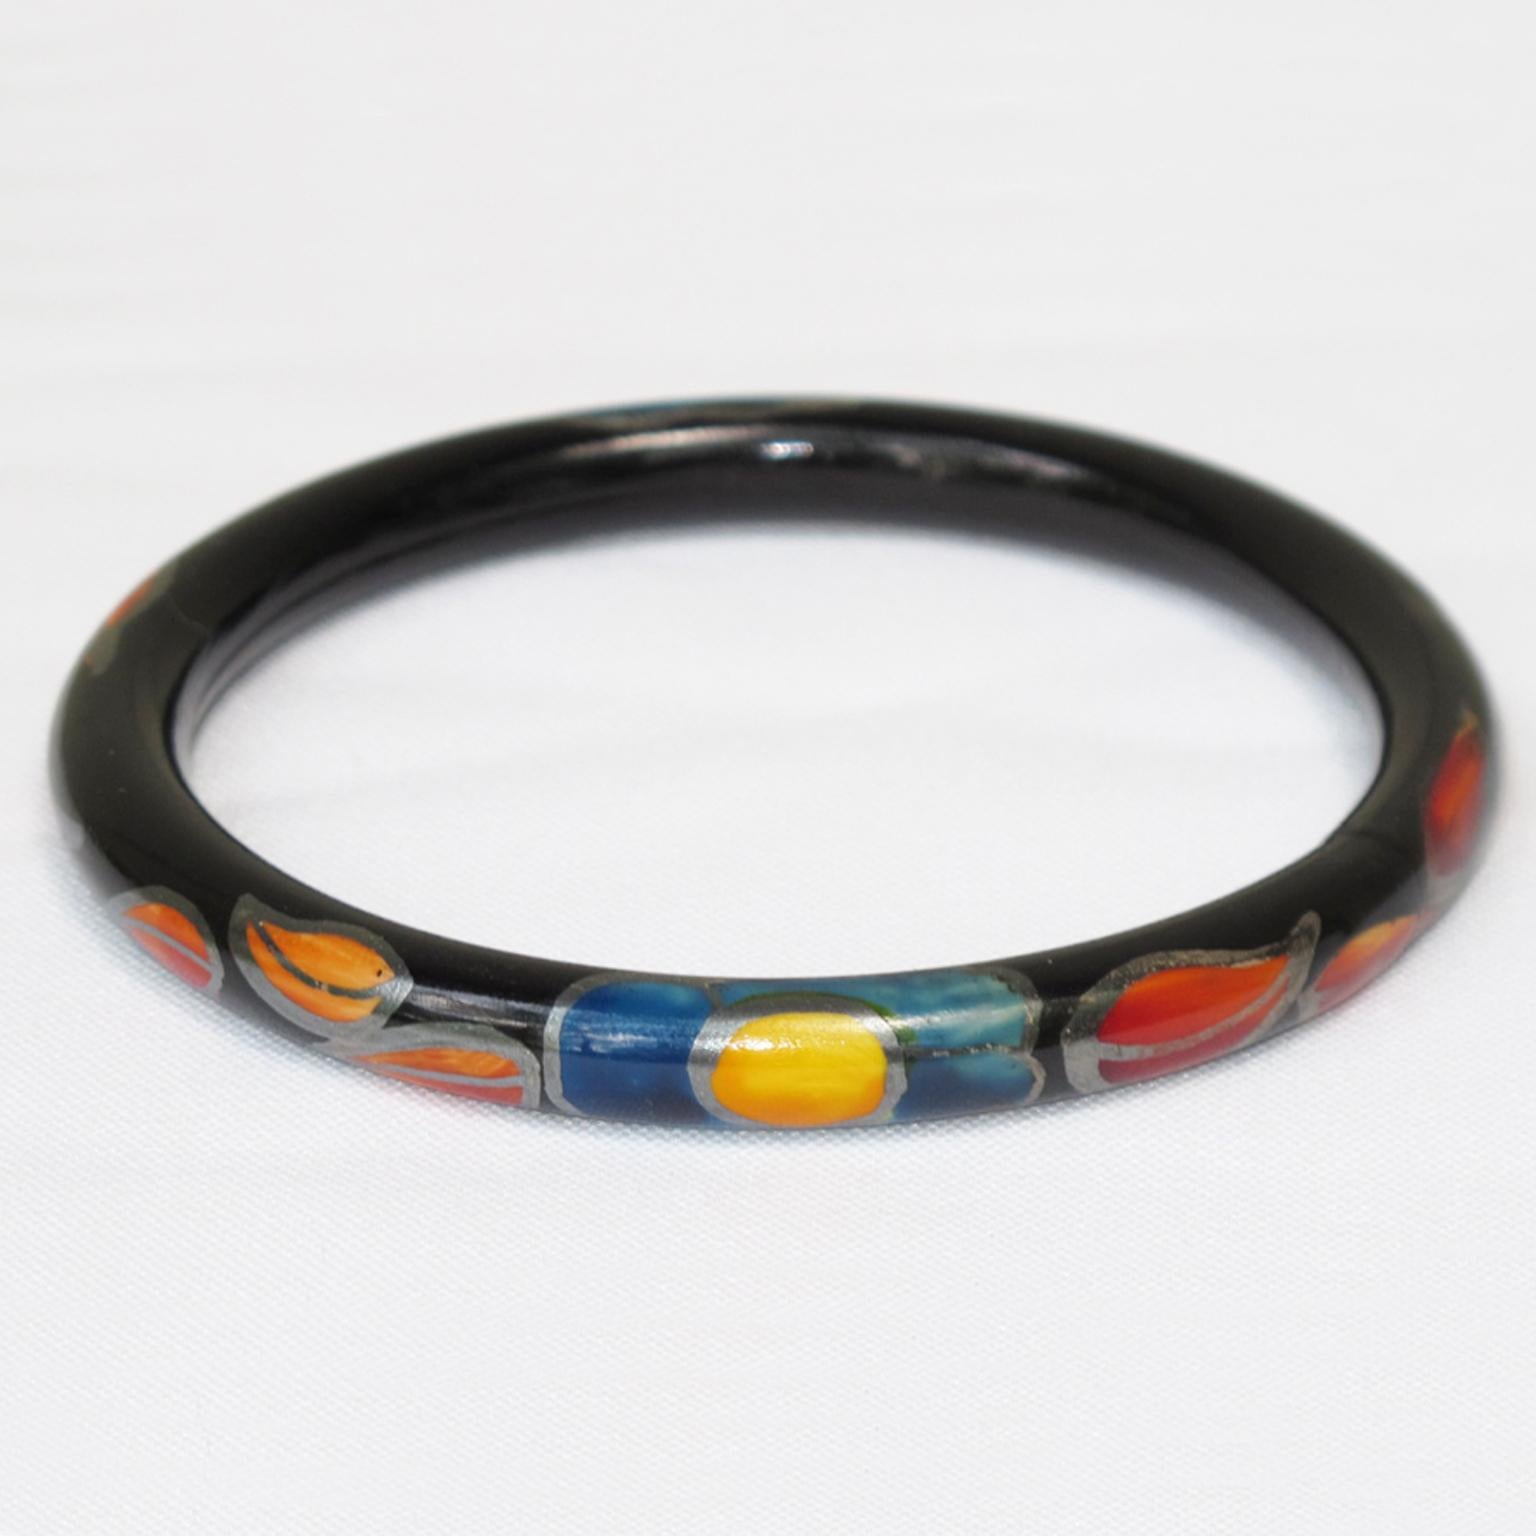 A lovely 1920s French Art Deco celluloid bracelet bangle. It features a light hollow tube shape with a leaf and flower design around the bracelet. 
The hollow bracelet technique is an ancient technique applied to jewelry at the turn of the 20th